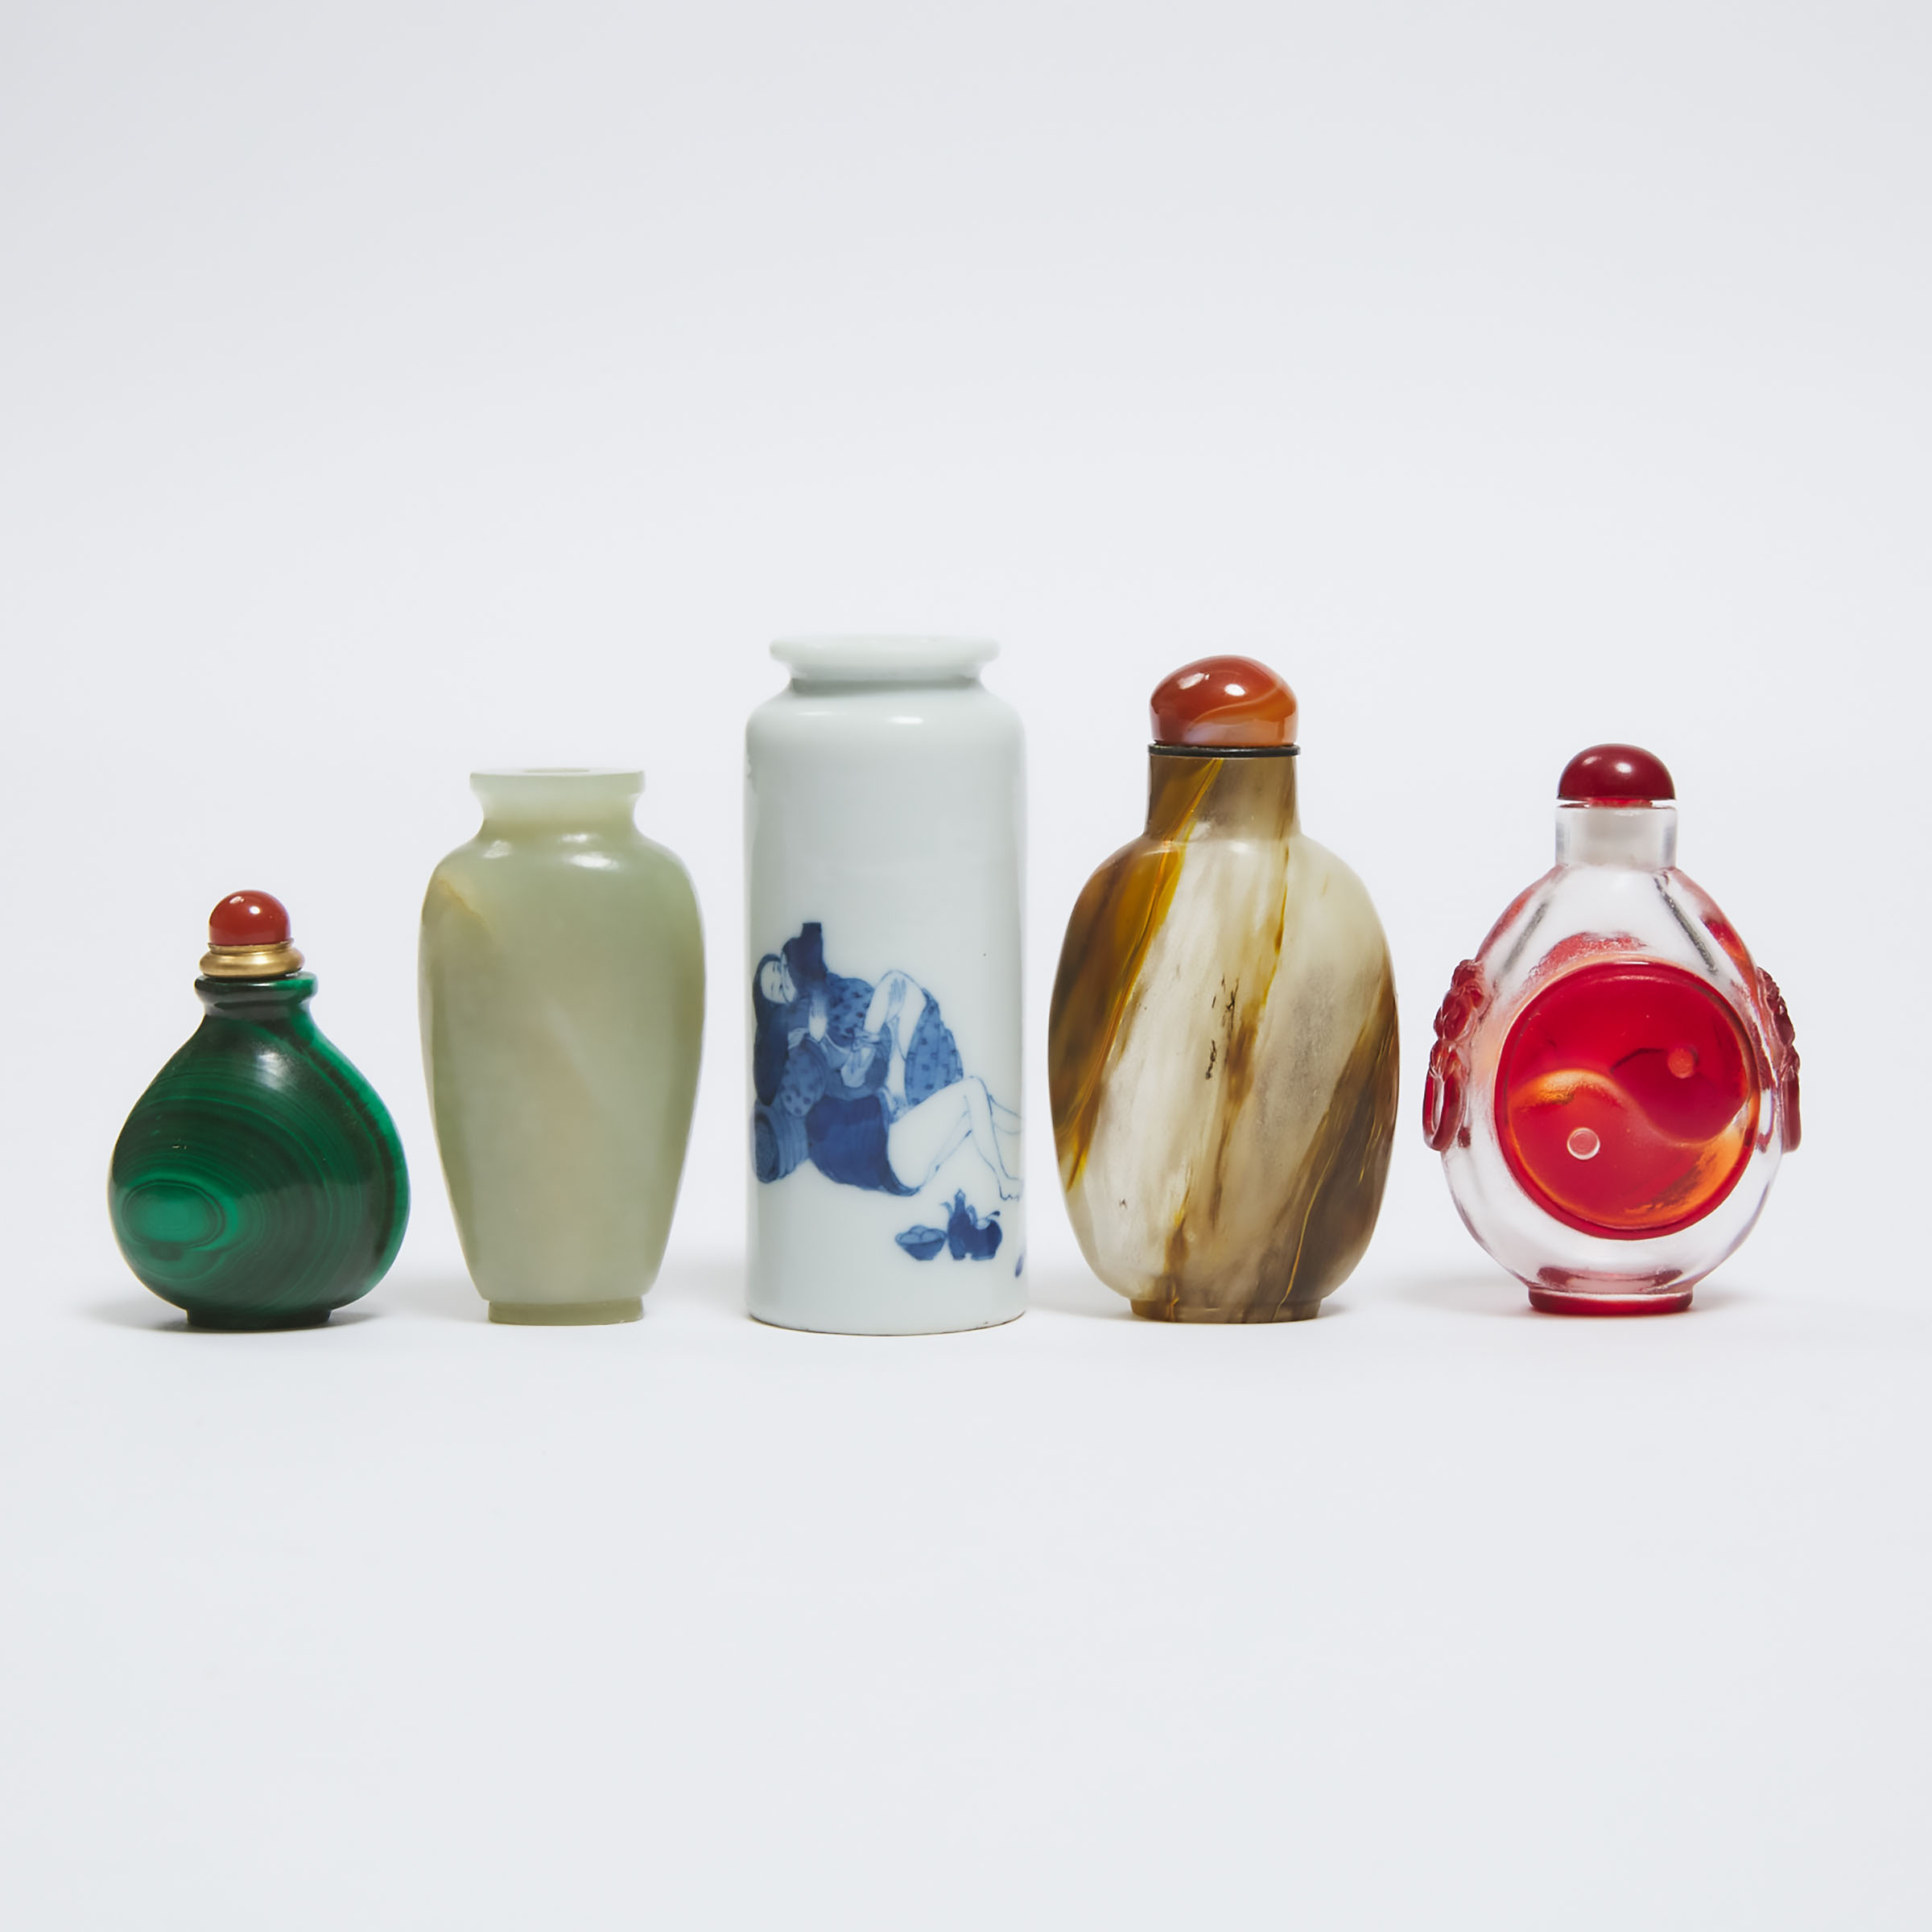 A Group of Five Snuff Bottles, 19th Century and Later